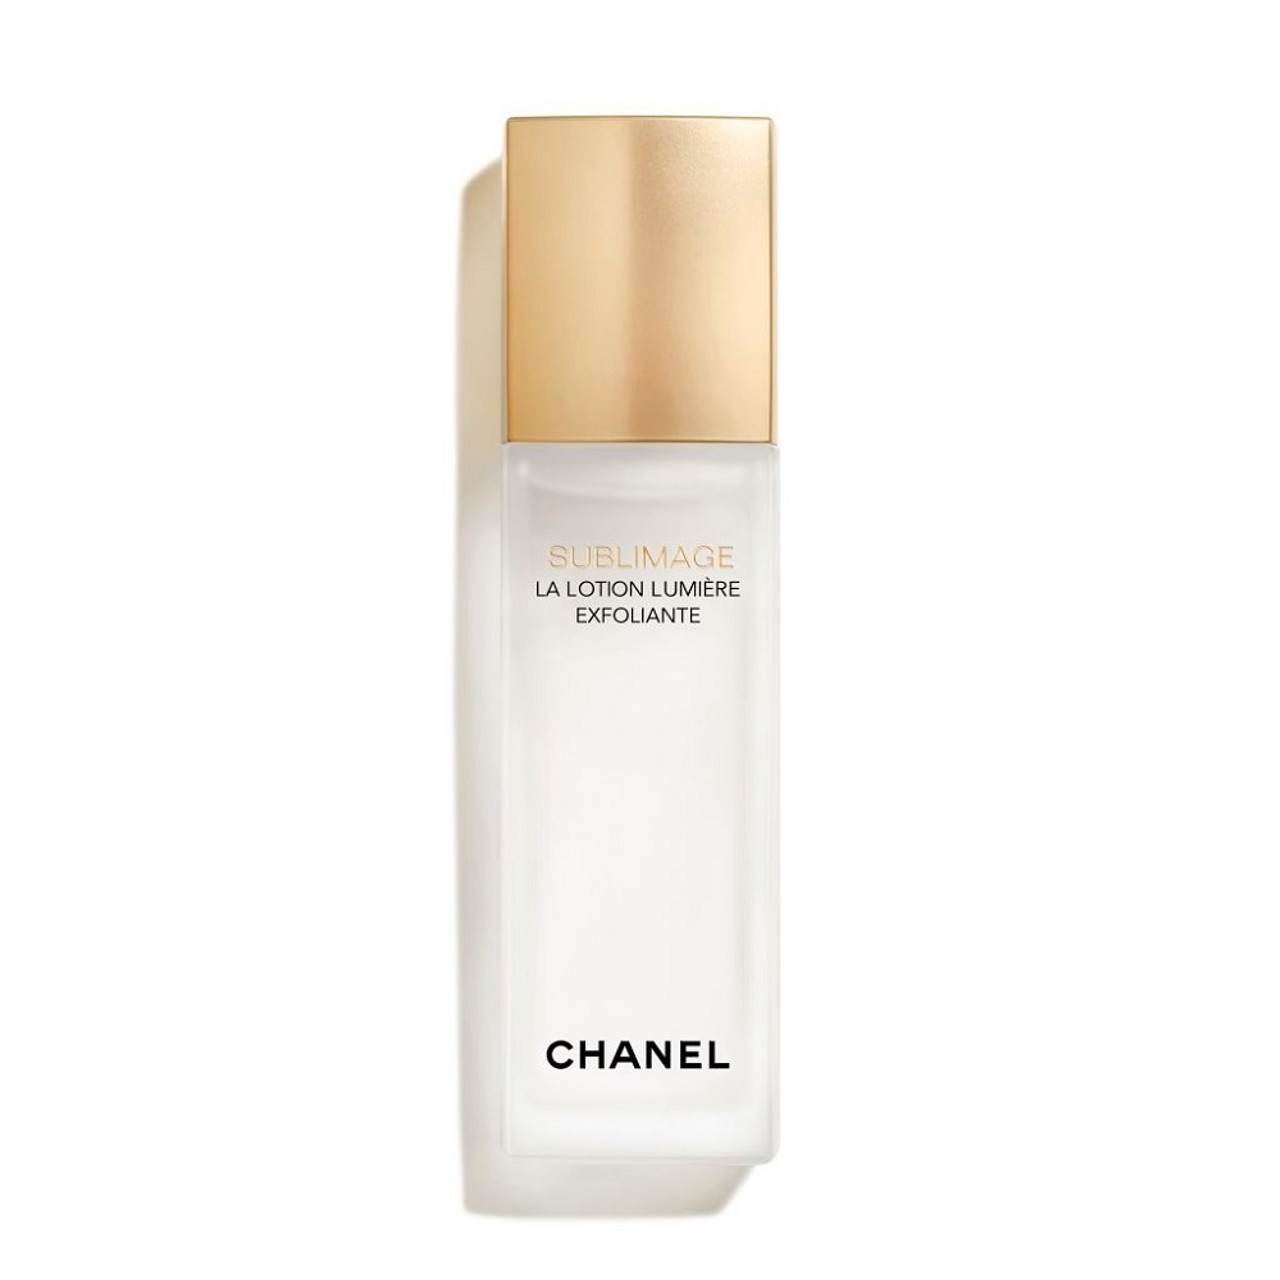 chanel makeup ultra le teint foundation